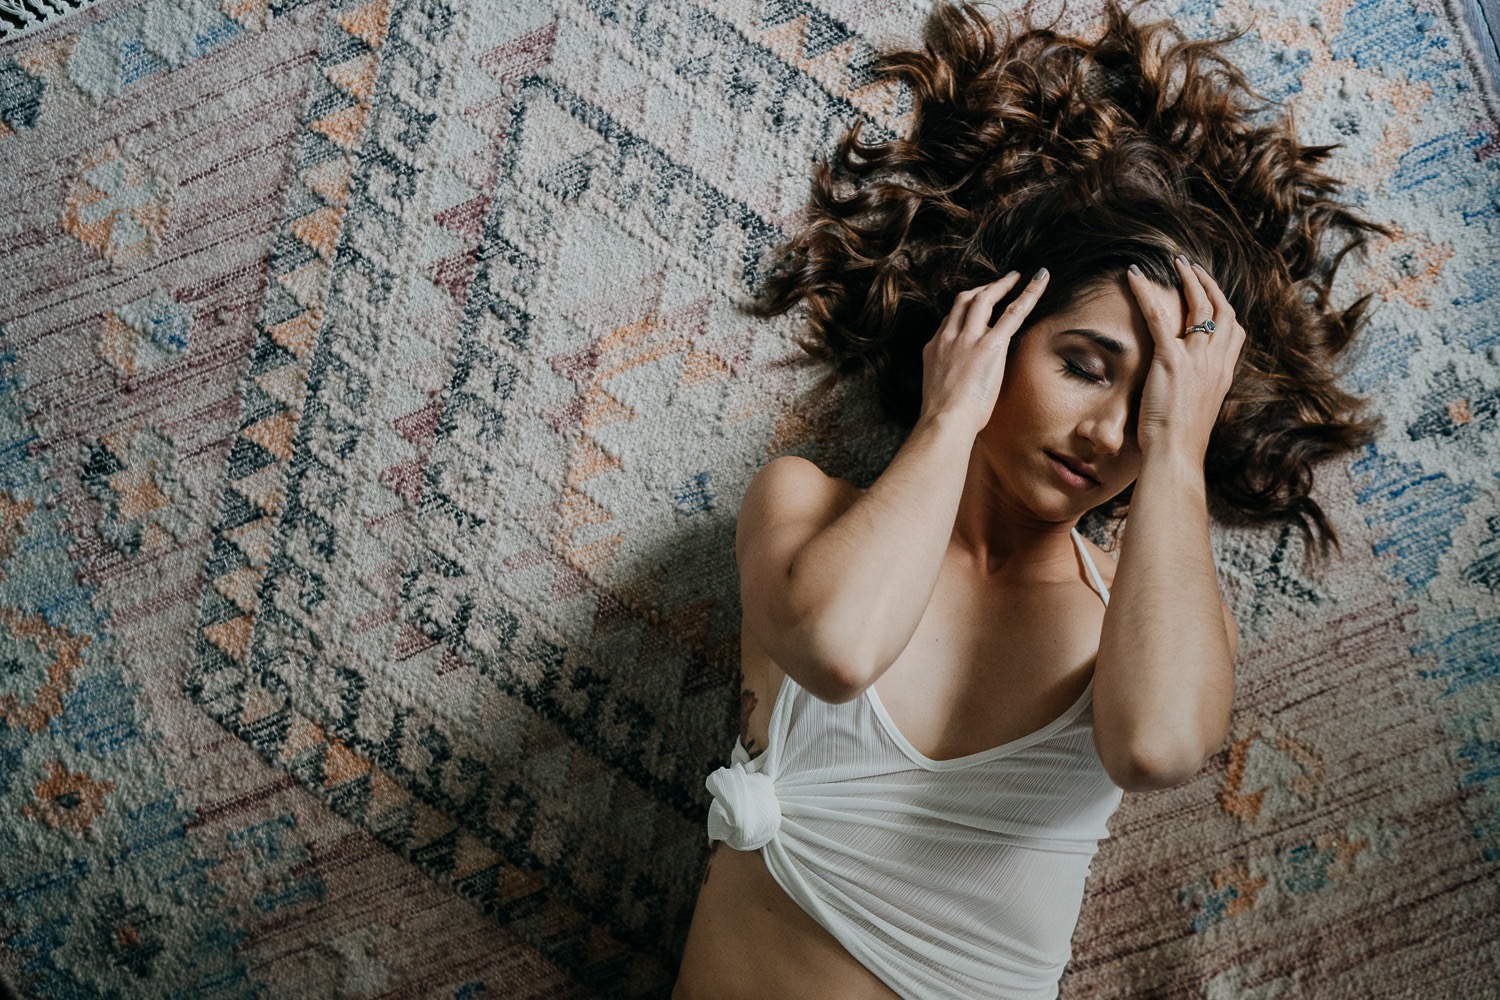 Boudoir Session Tips for the Perfect Shoot 